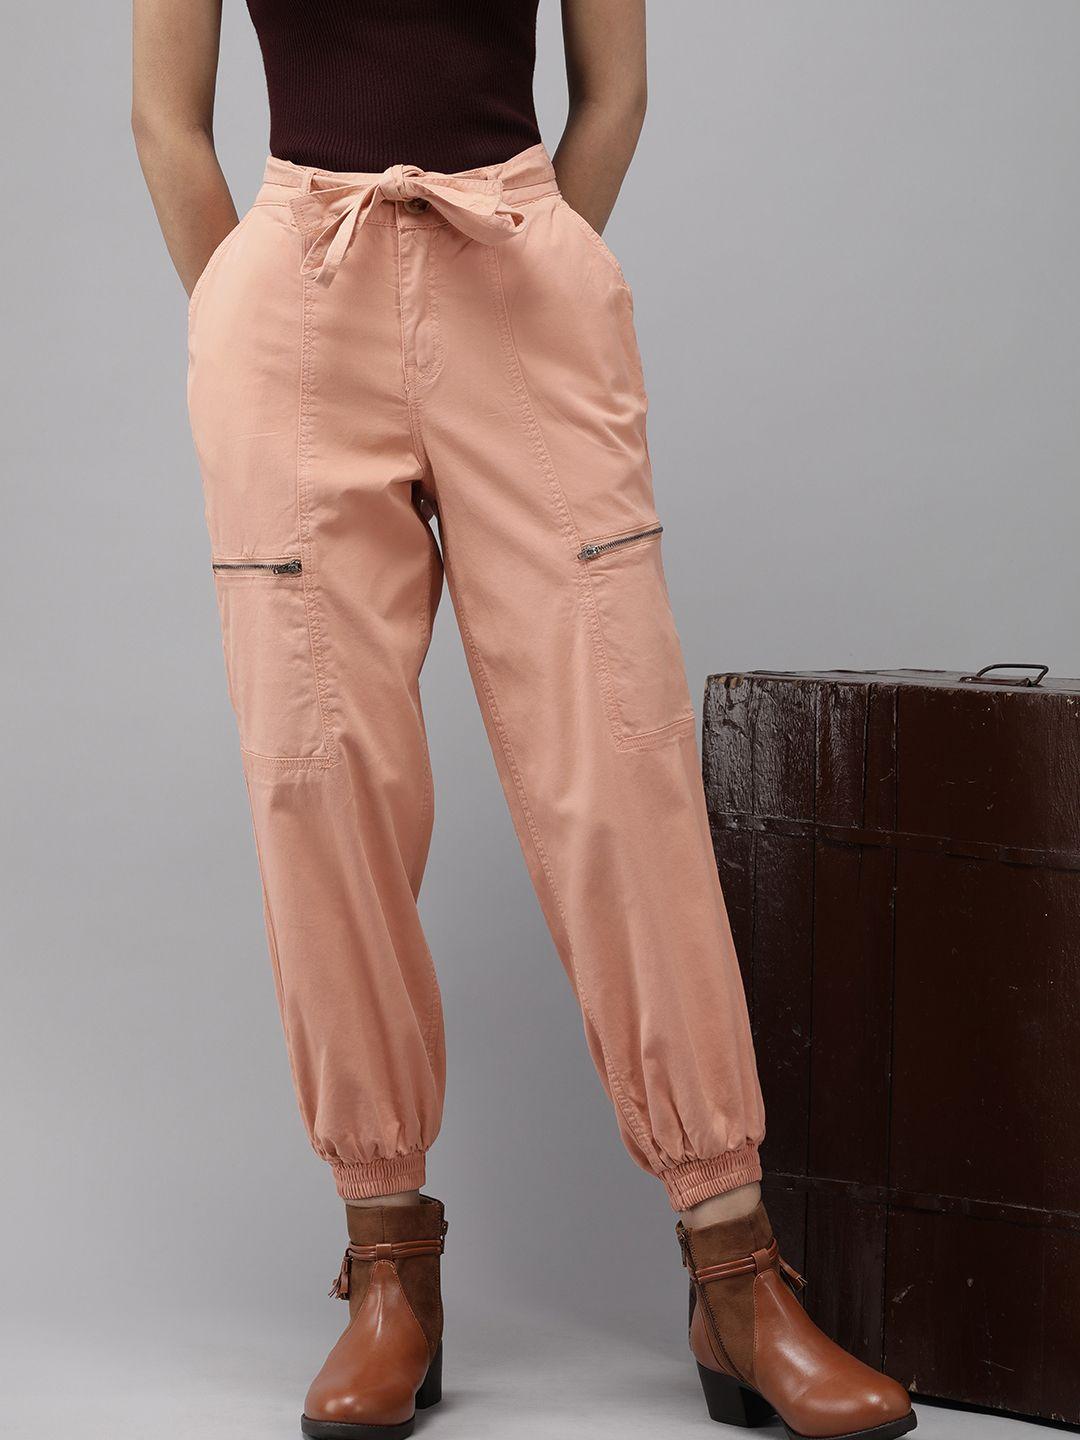 the roadster life co. women mid-rise belted cargo style joggers